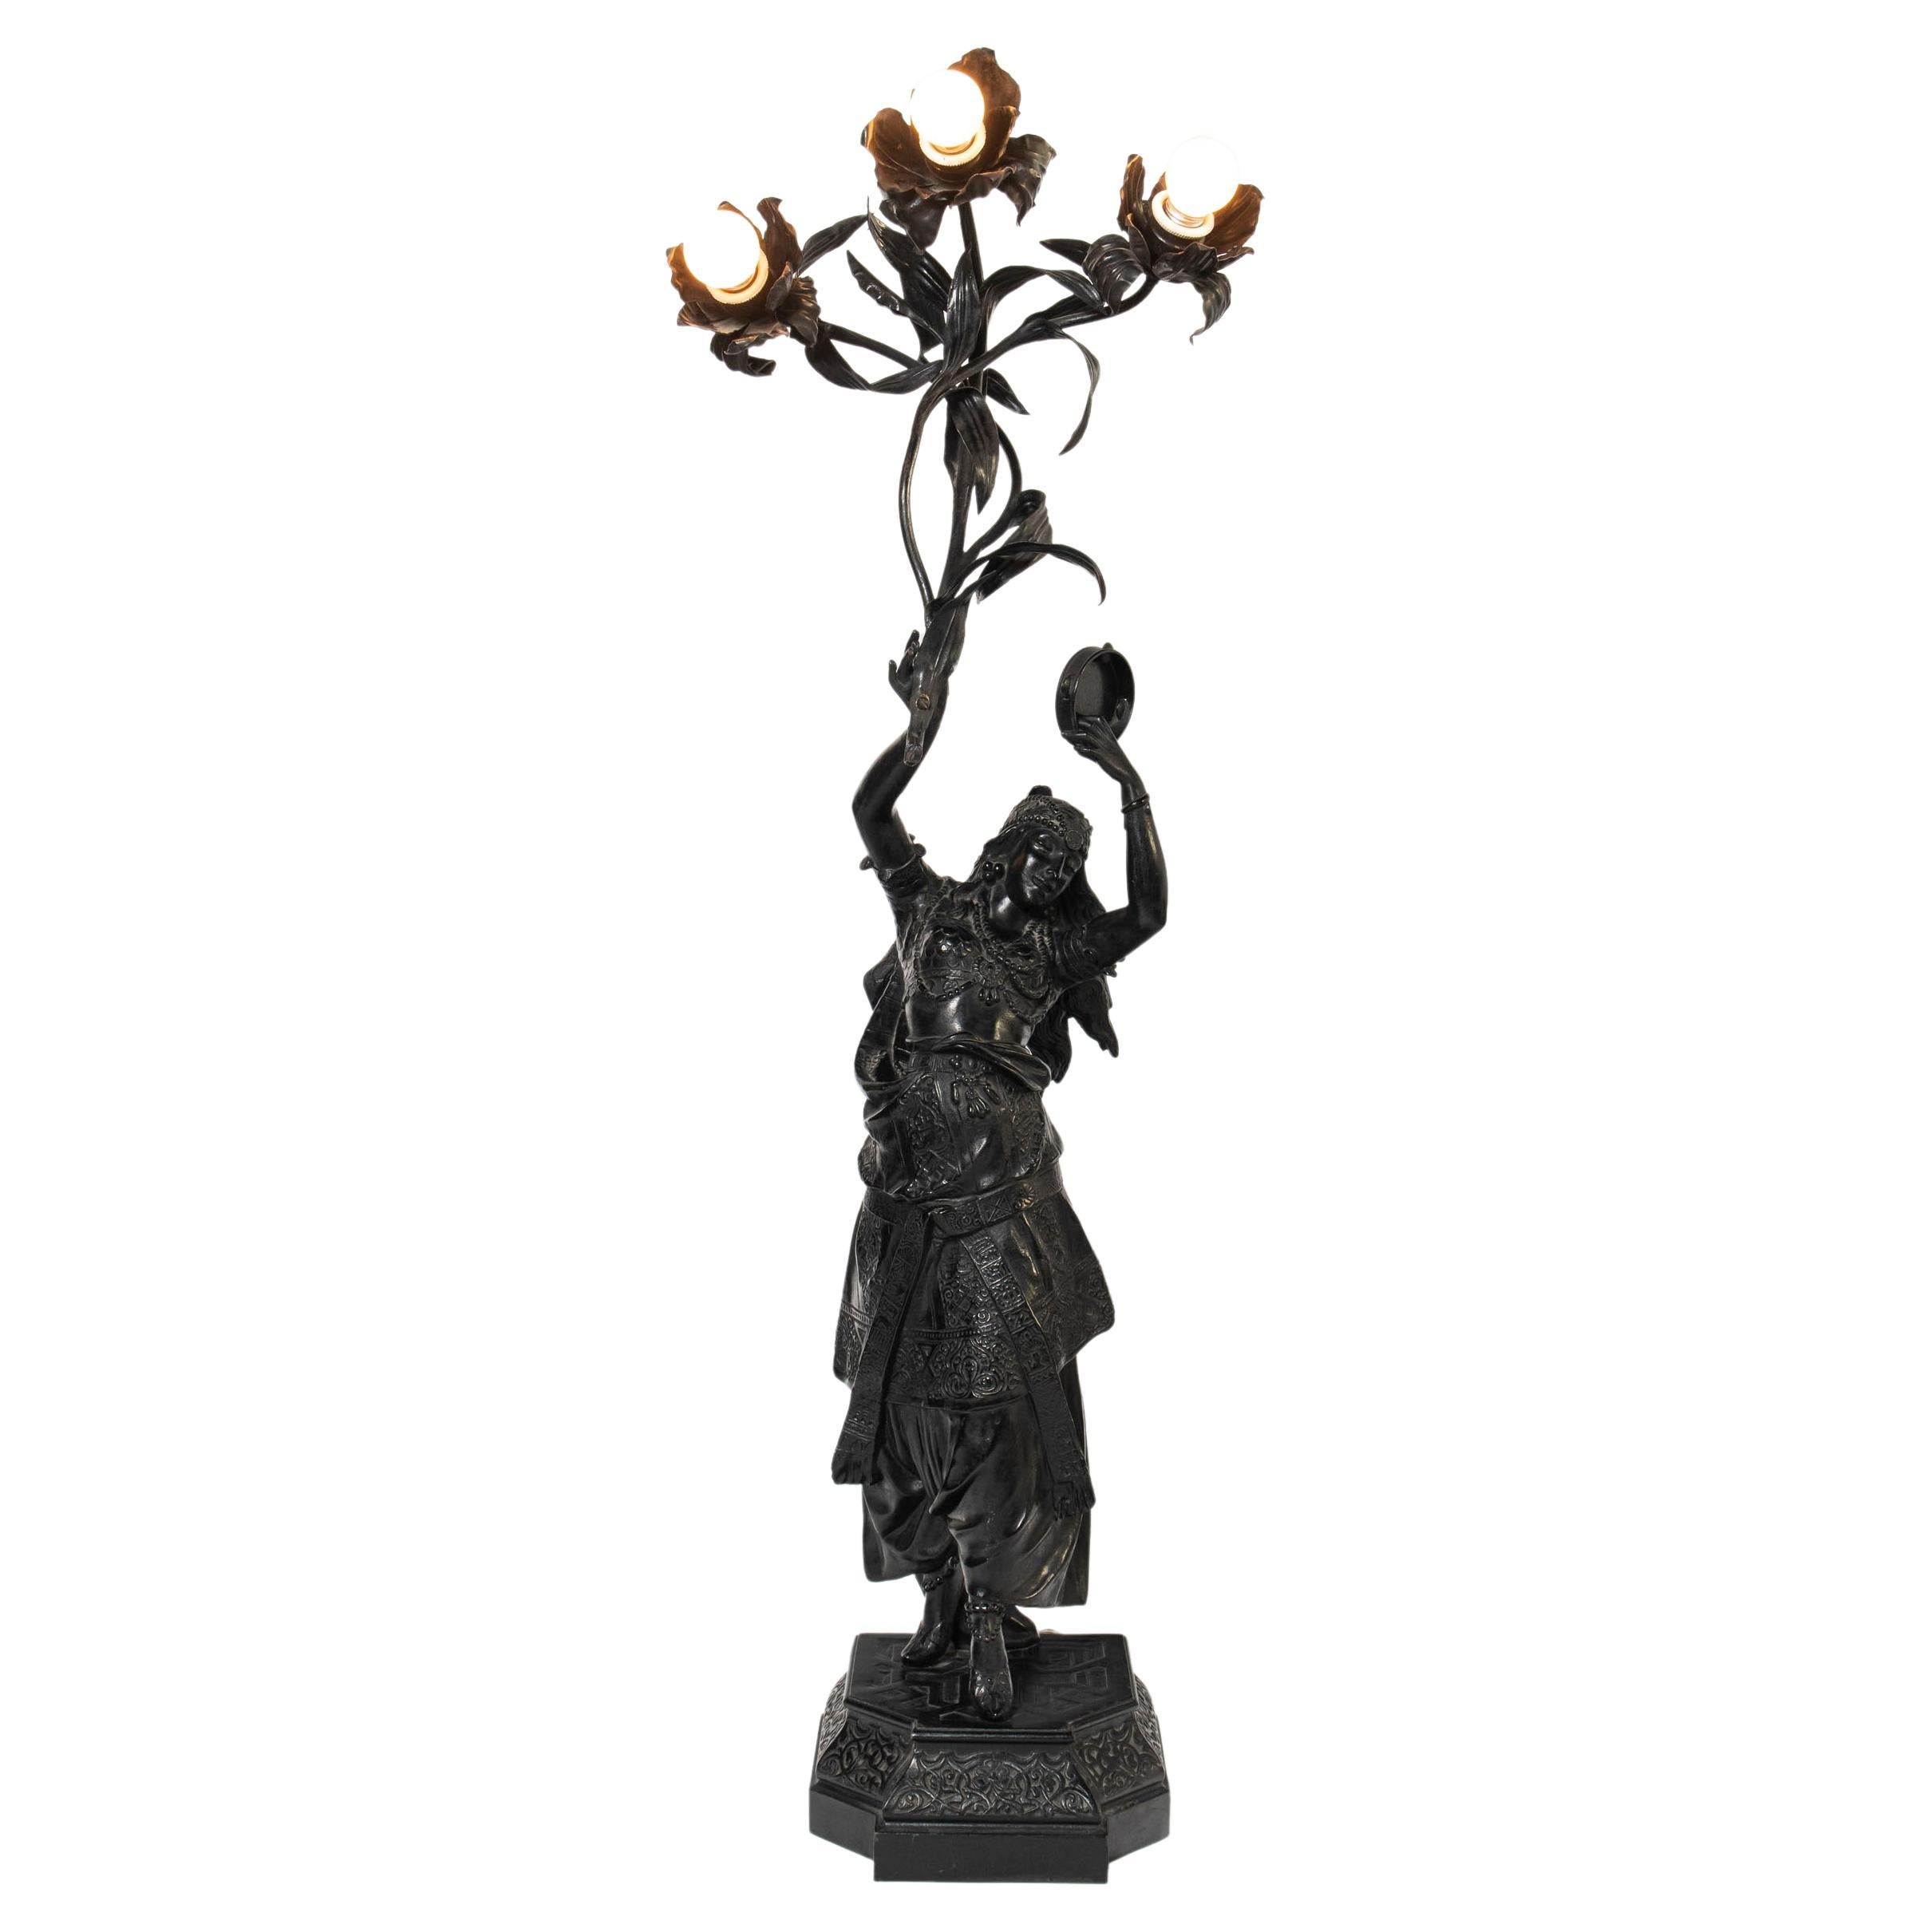 Bronze Alloy Table Lamp Sculpture Signed Waagen, Germany, circa 1890